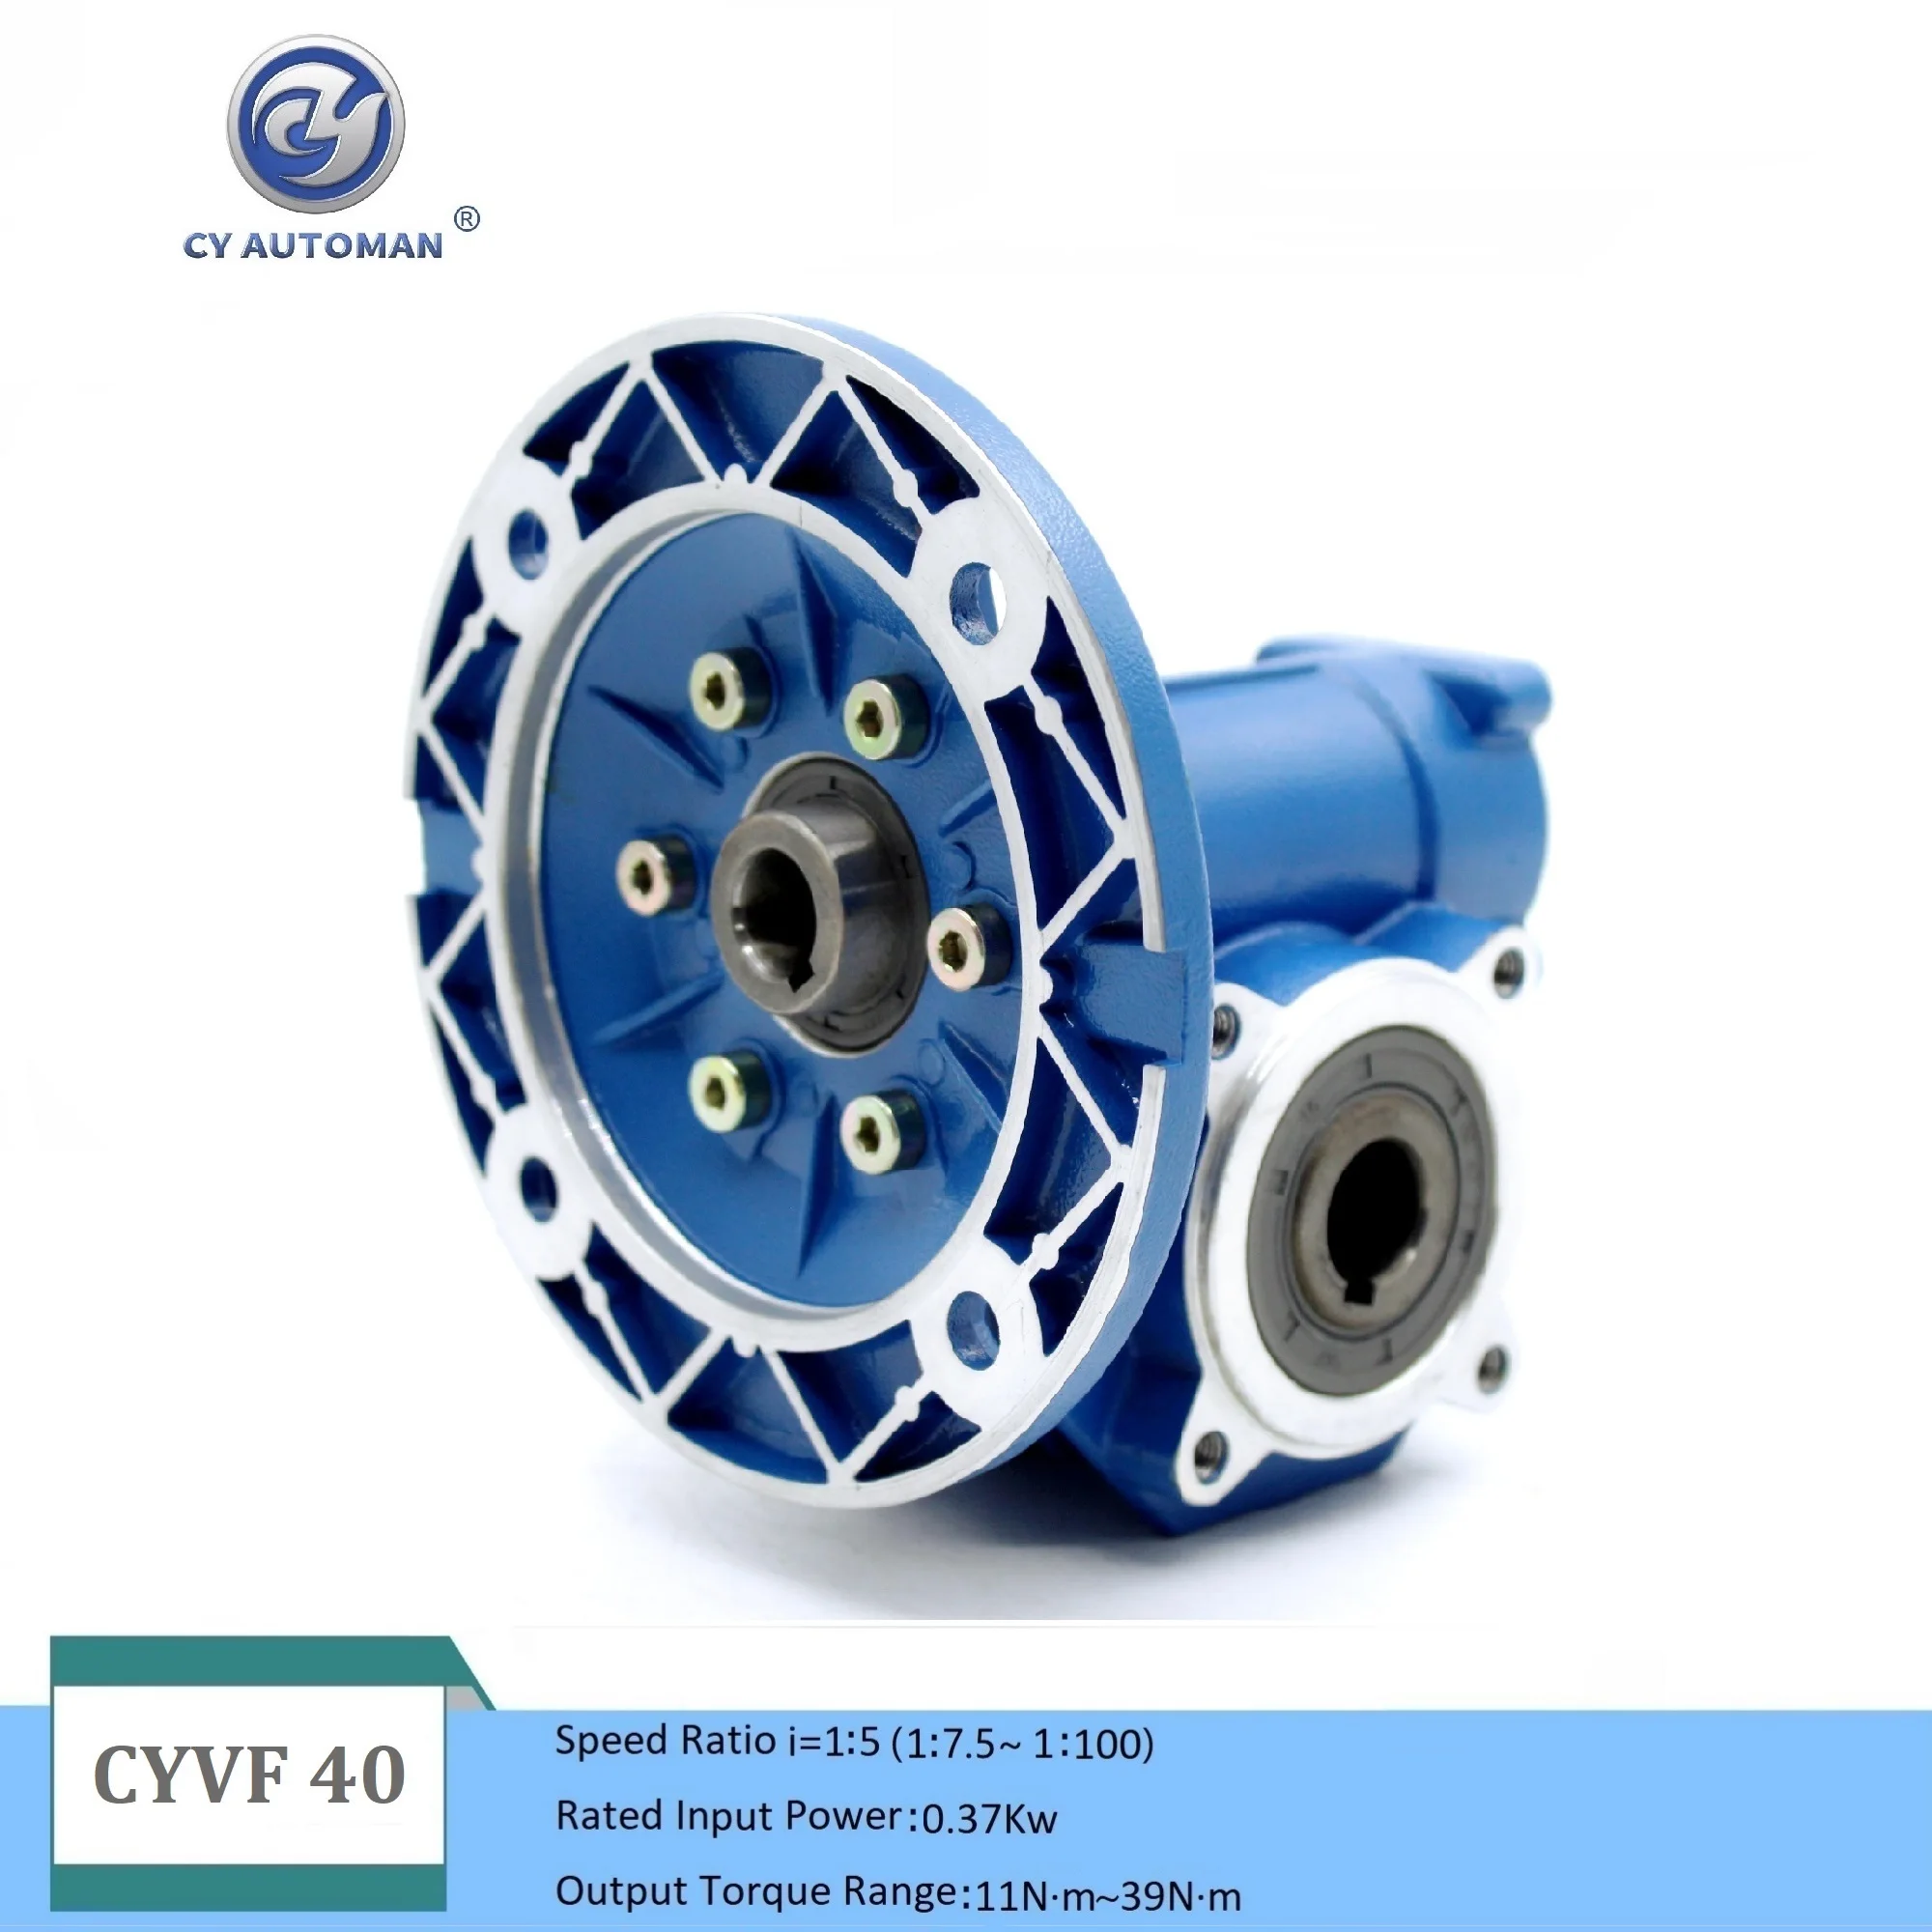 

Automan High Torque Worm Gearbox Reducer CYVF40 Input hole 14mm 11mm Output 18mm Ratio 5:1/100:1 for Small Motors GW≈2.1Kgs